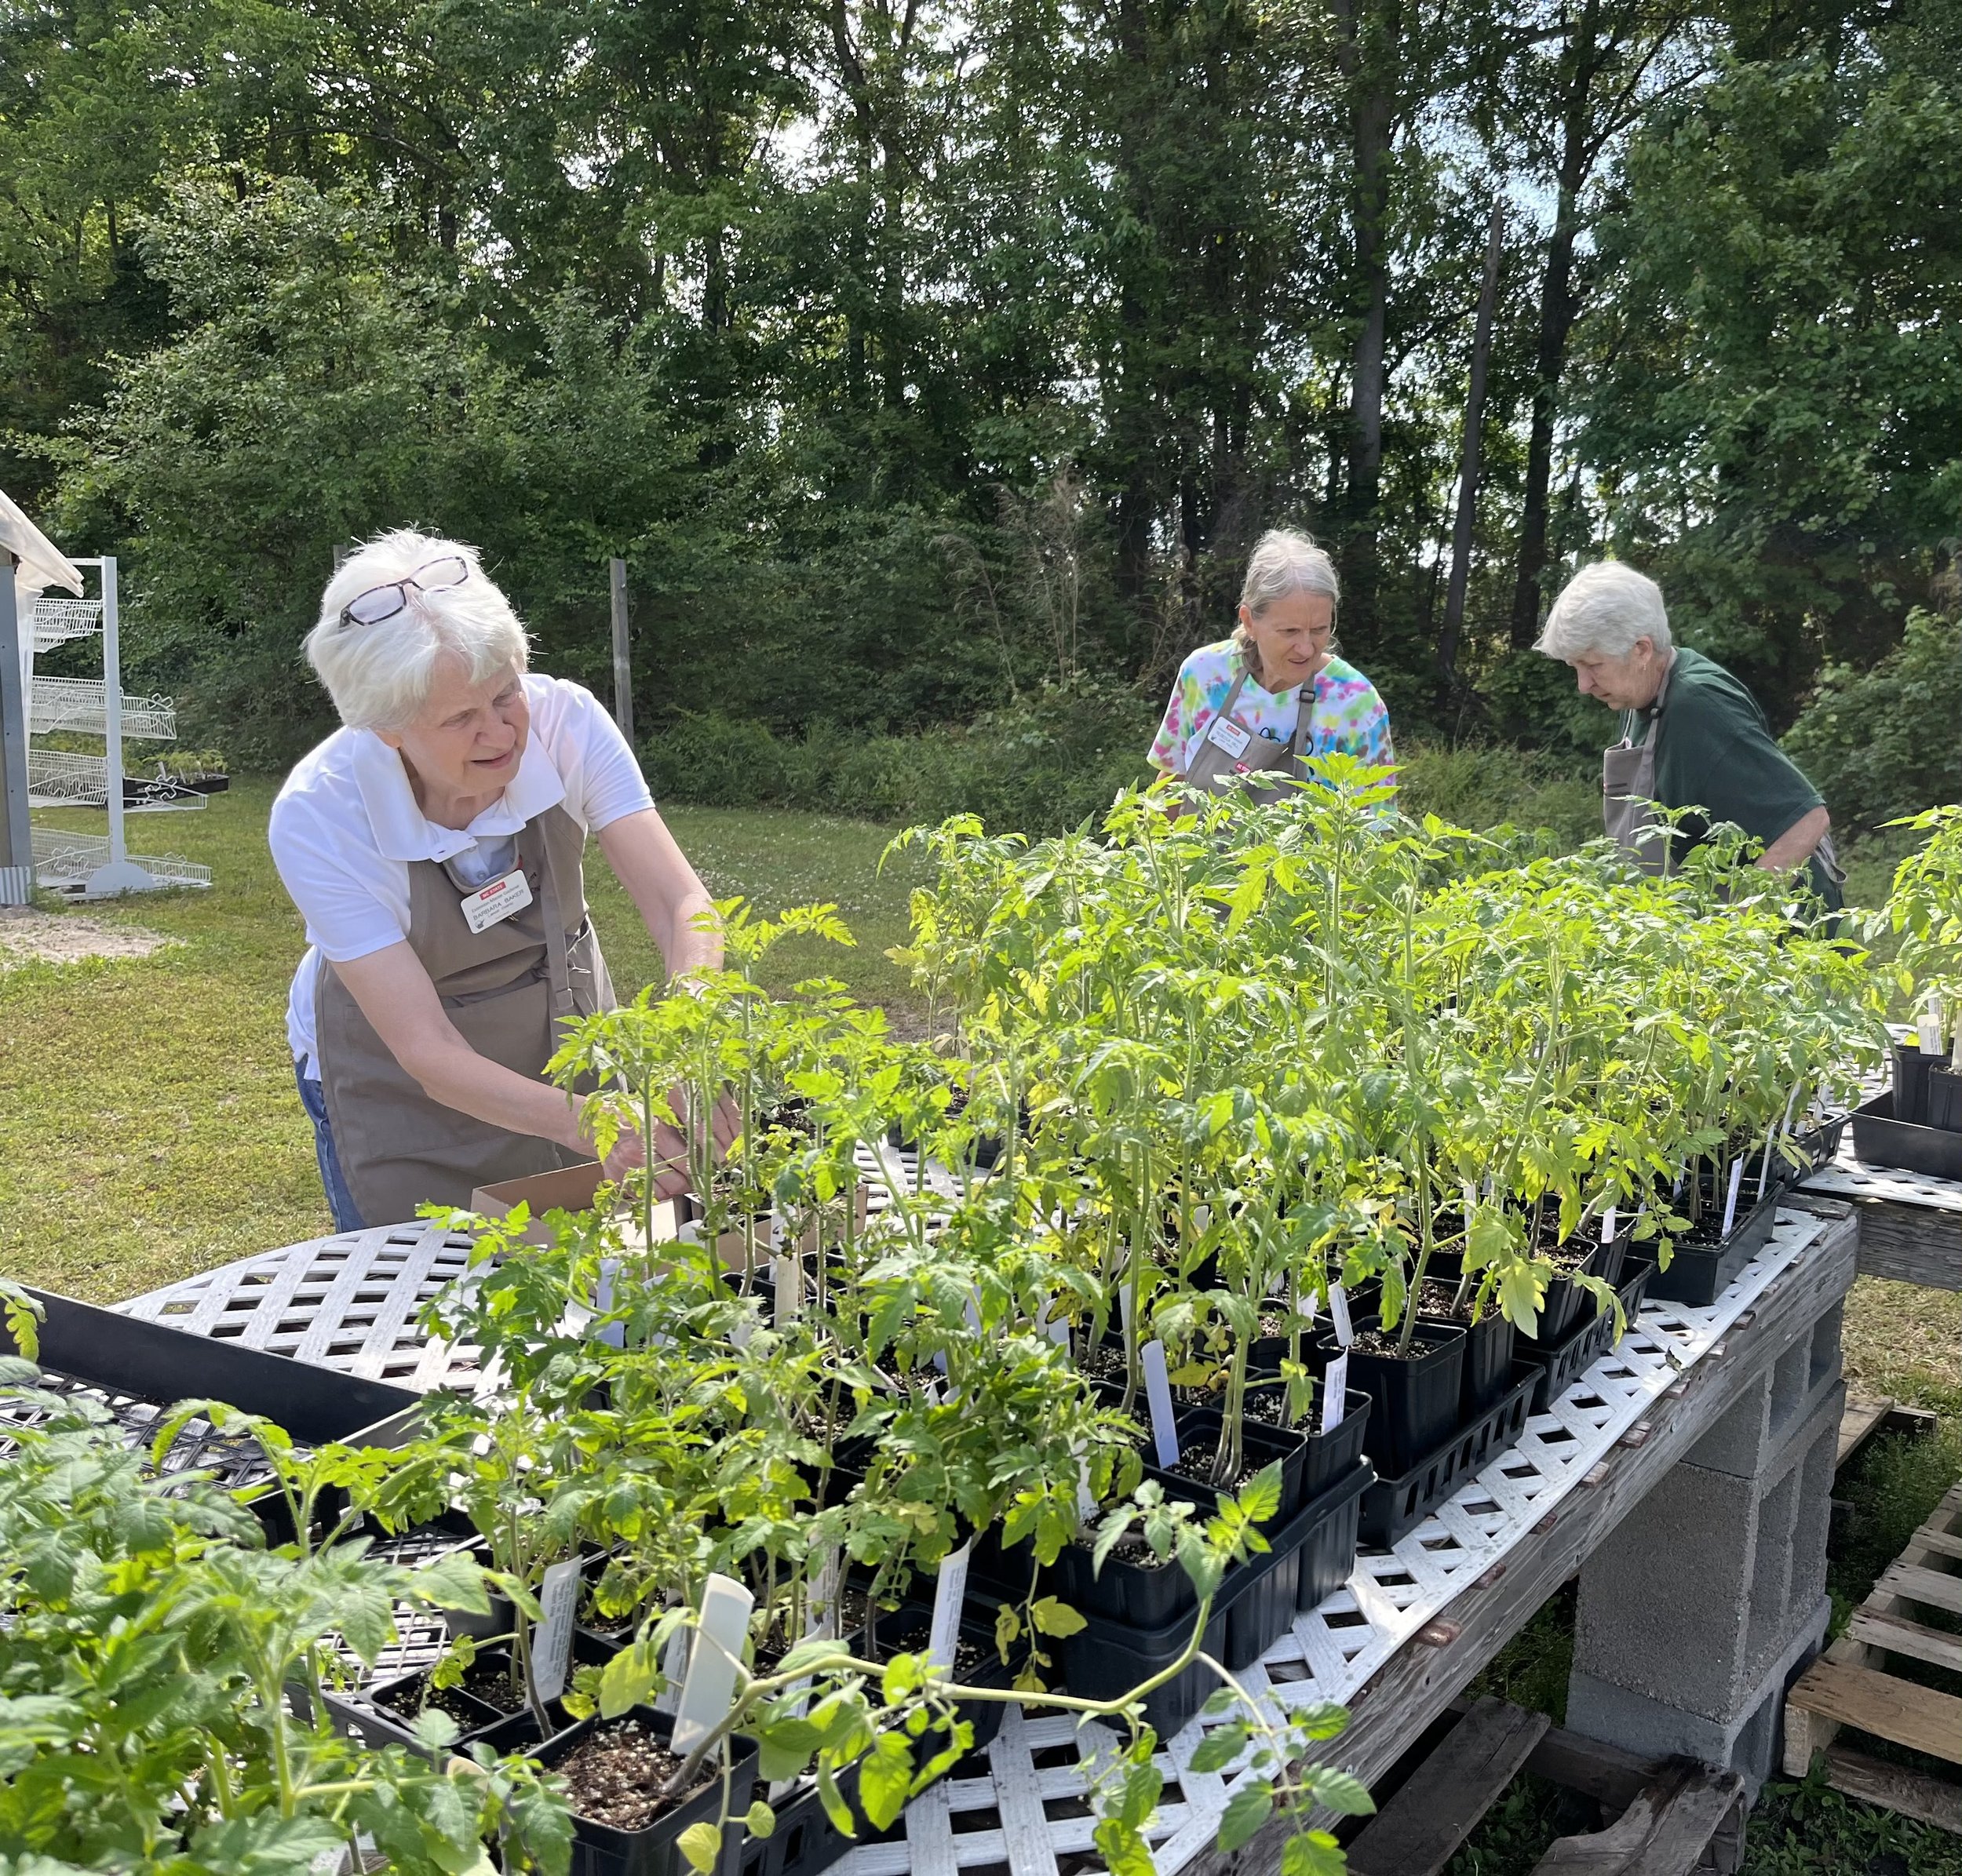 Lenoir County Master Gardeners Barbara Baker, Rebecca Hill, and Sally Durst (left to right) were getting the tomato varieties organized for the sale. We offered 17 different types.